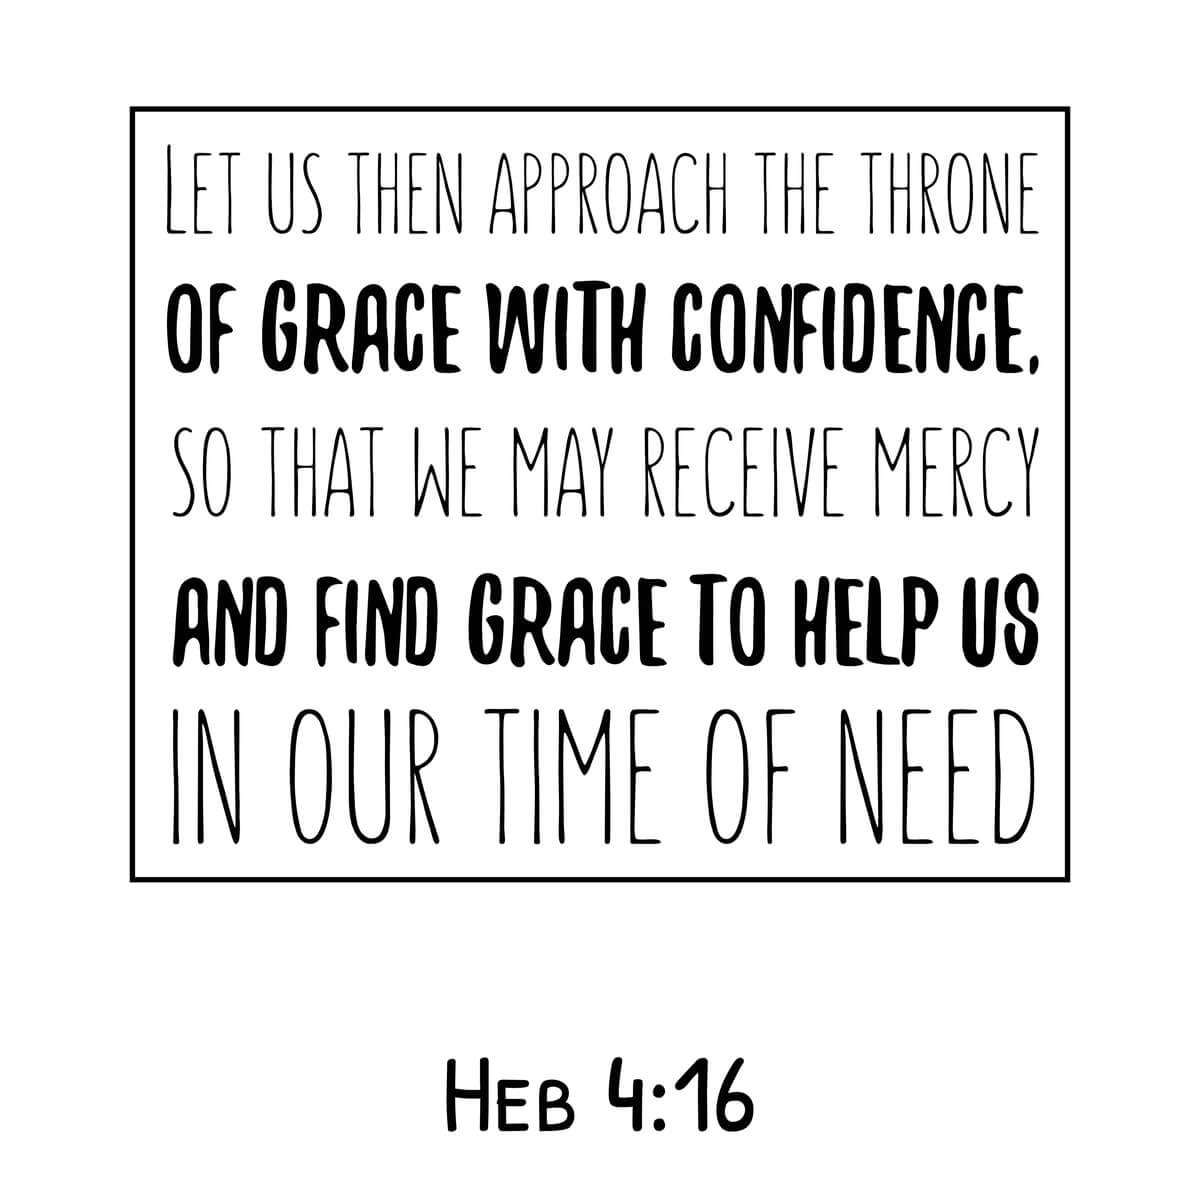 Let us then approach the throne of grace with confidence